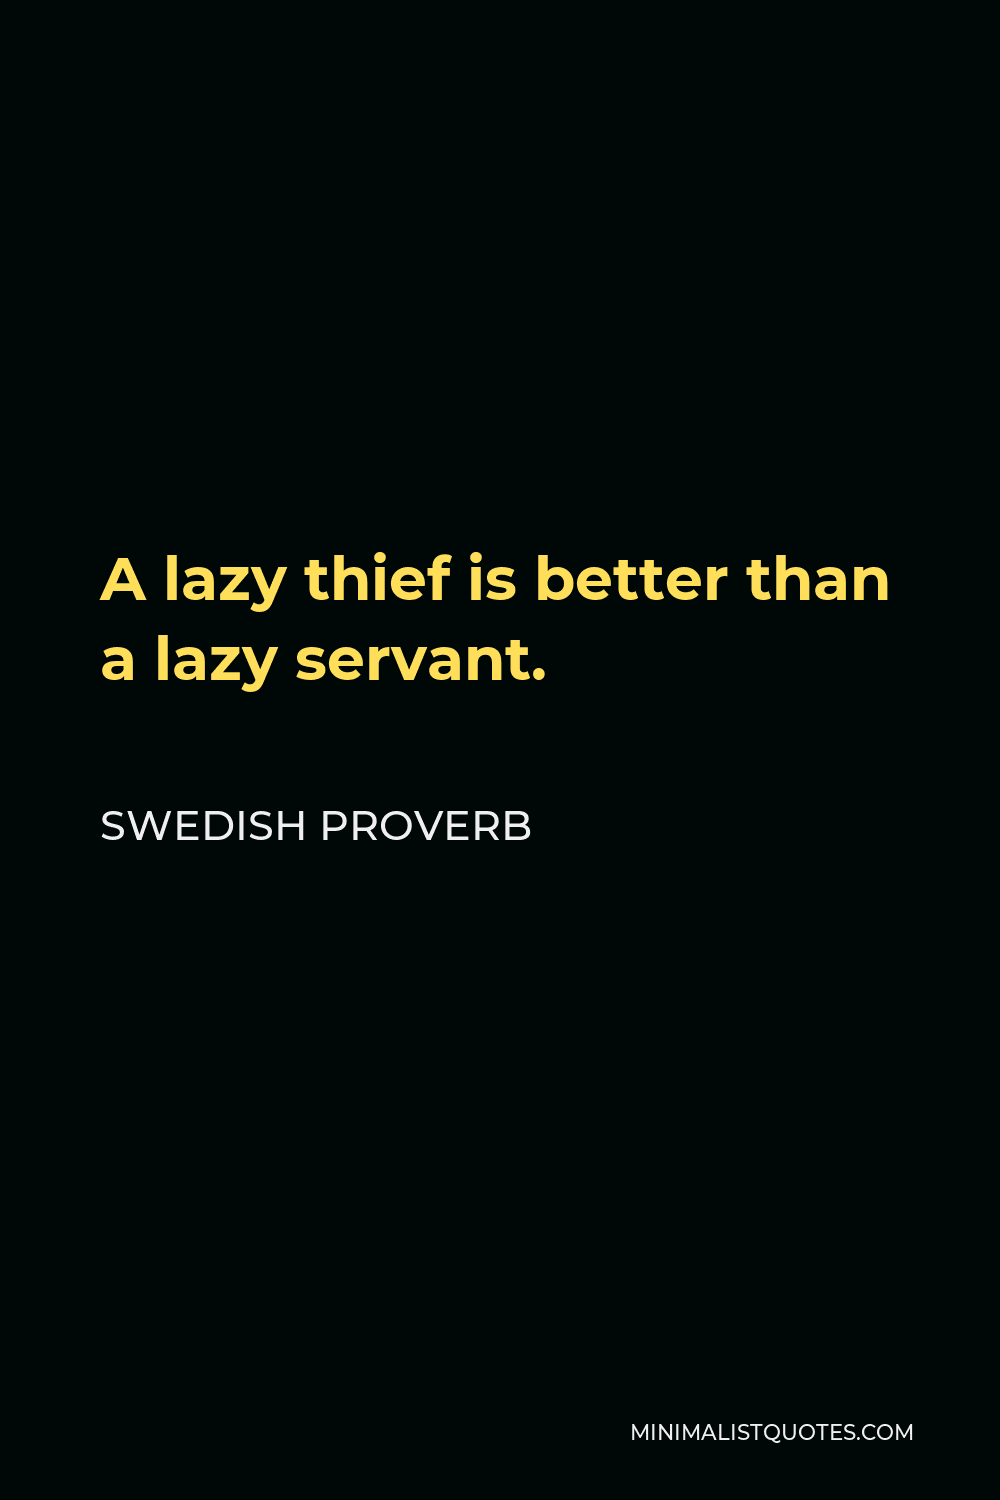 Swedish Proverb Quote - A lazy thief is better than a lazy servant.